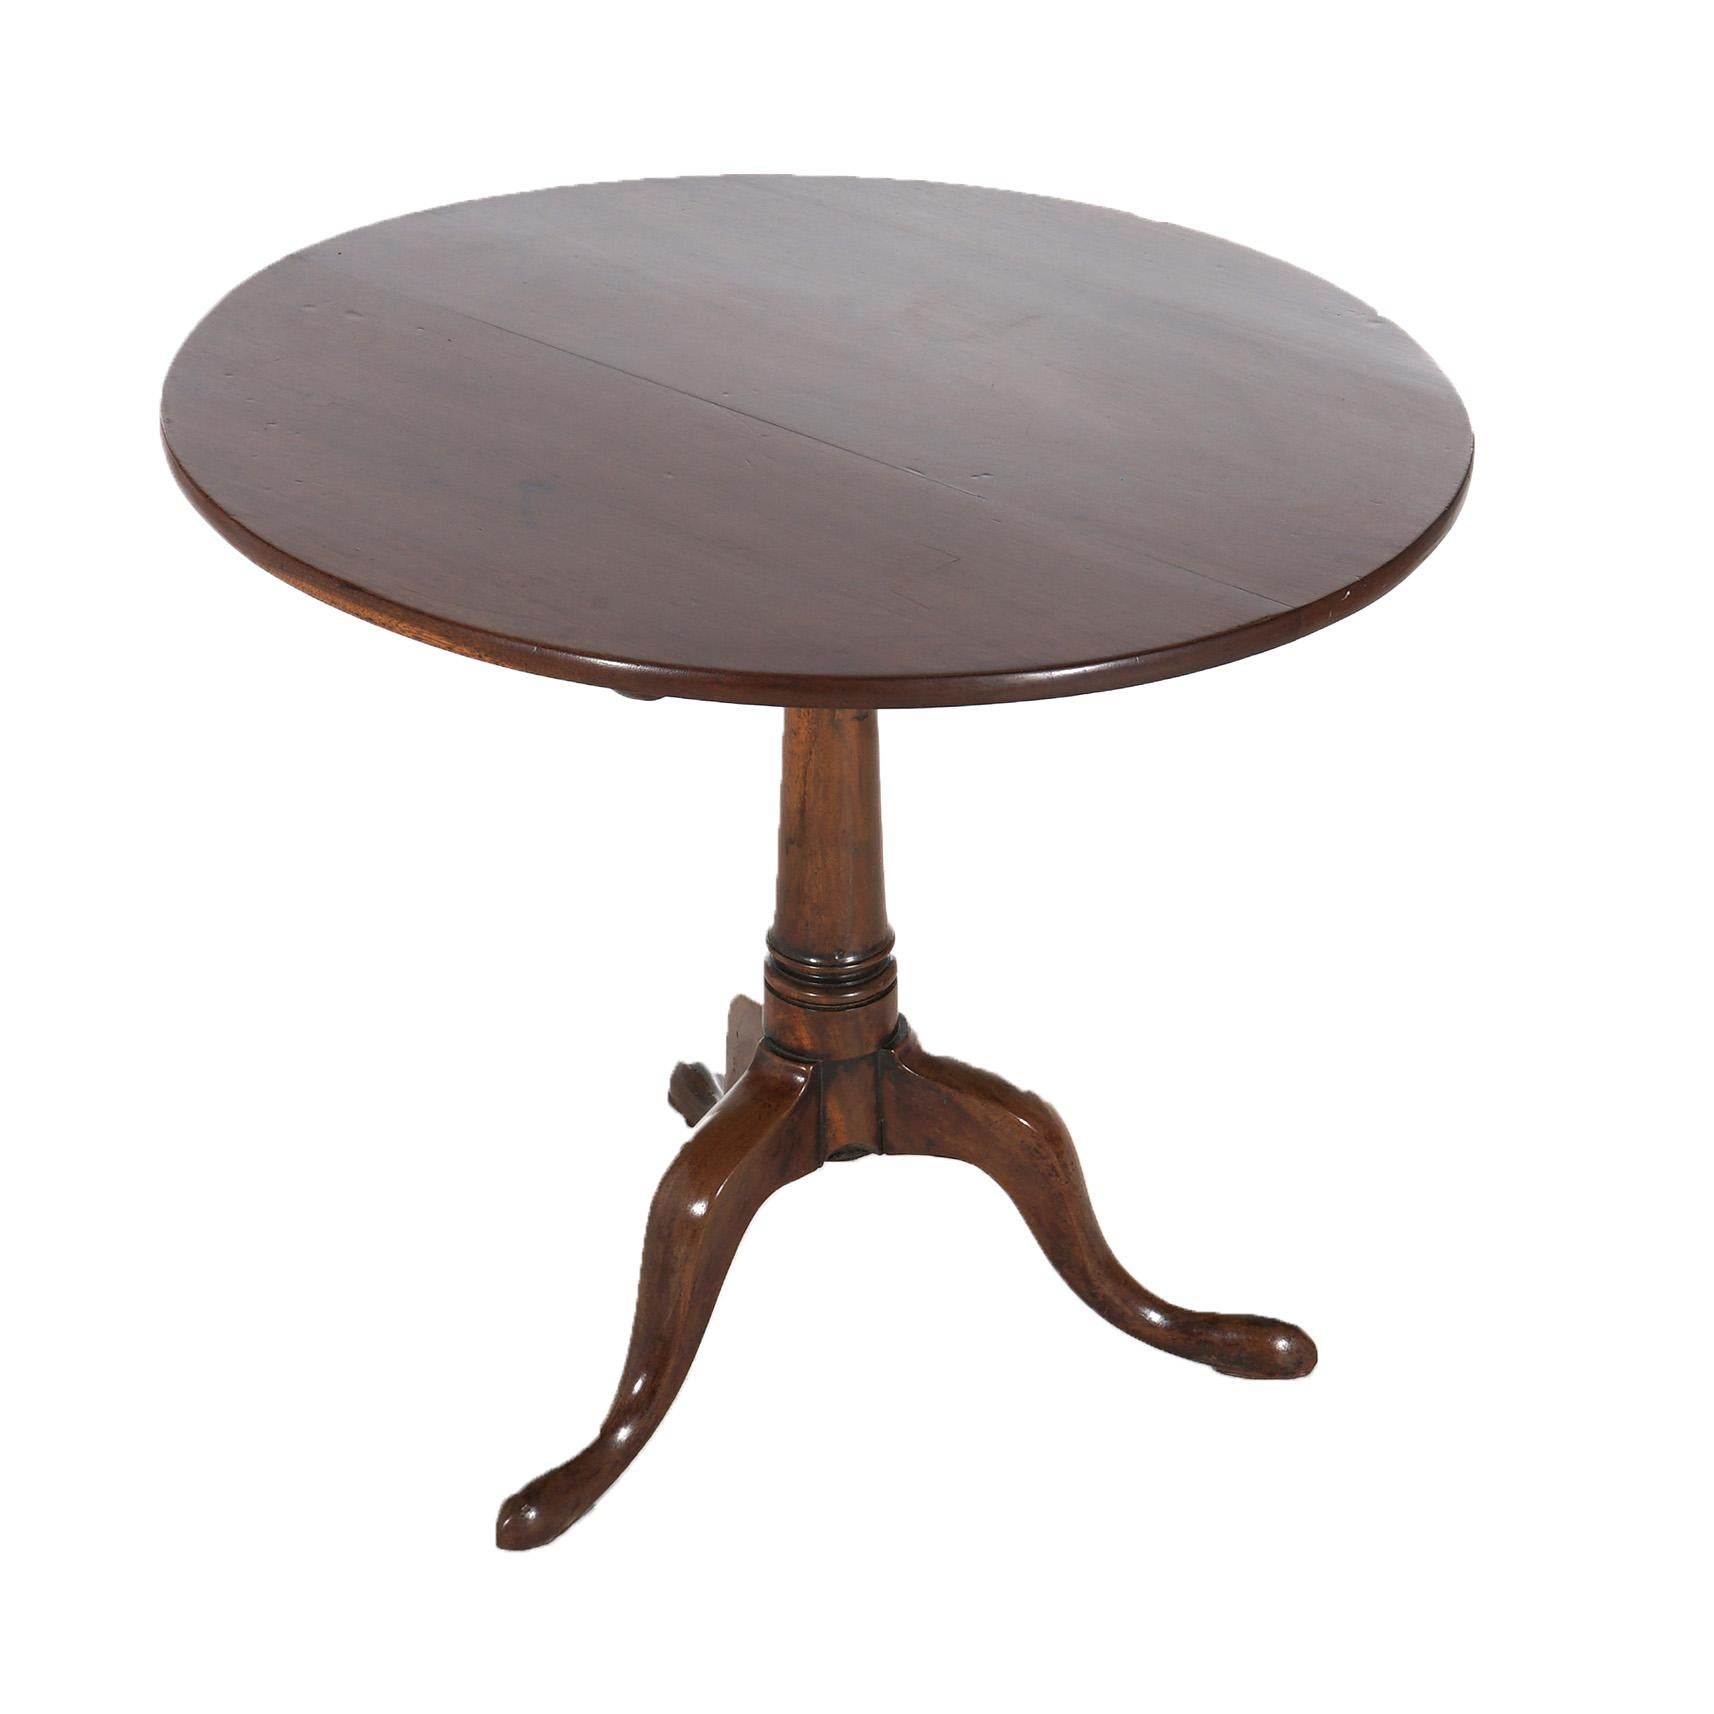 18th Century Antique Queen Anne Walnut Tilt Top Table with Turned Column on Cabriole Legs Terminating in Pad Feet, C1770

Measures - 27.5